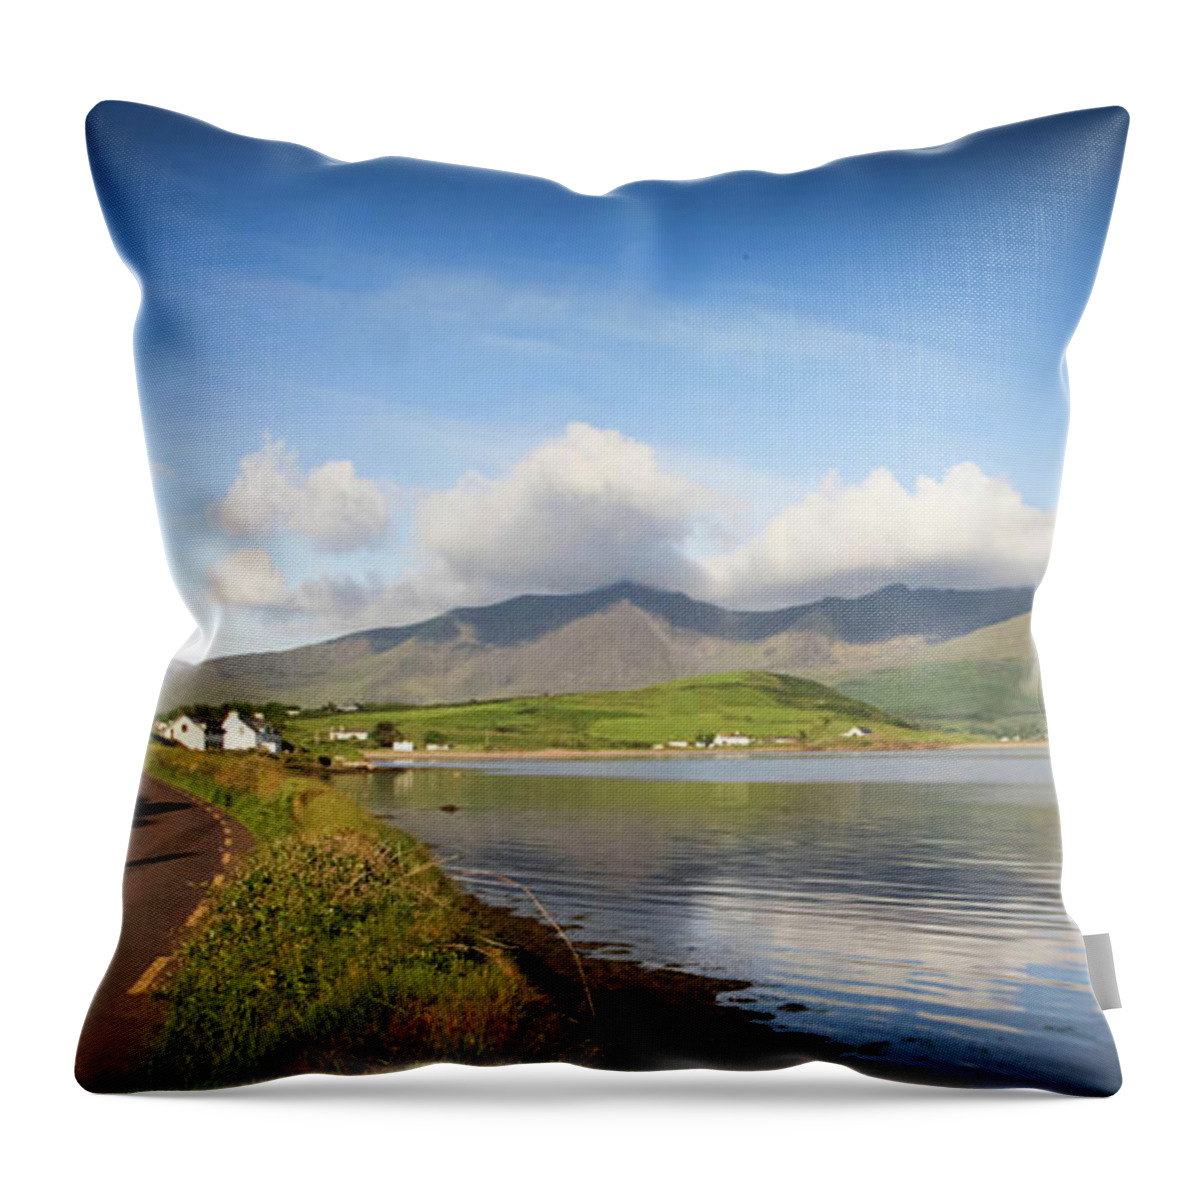 Road Throw Pillow featuring the photograph Road To Cloghane by Mark Callanan